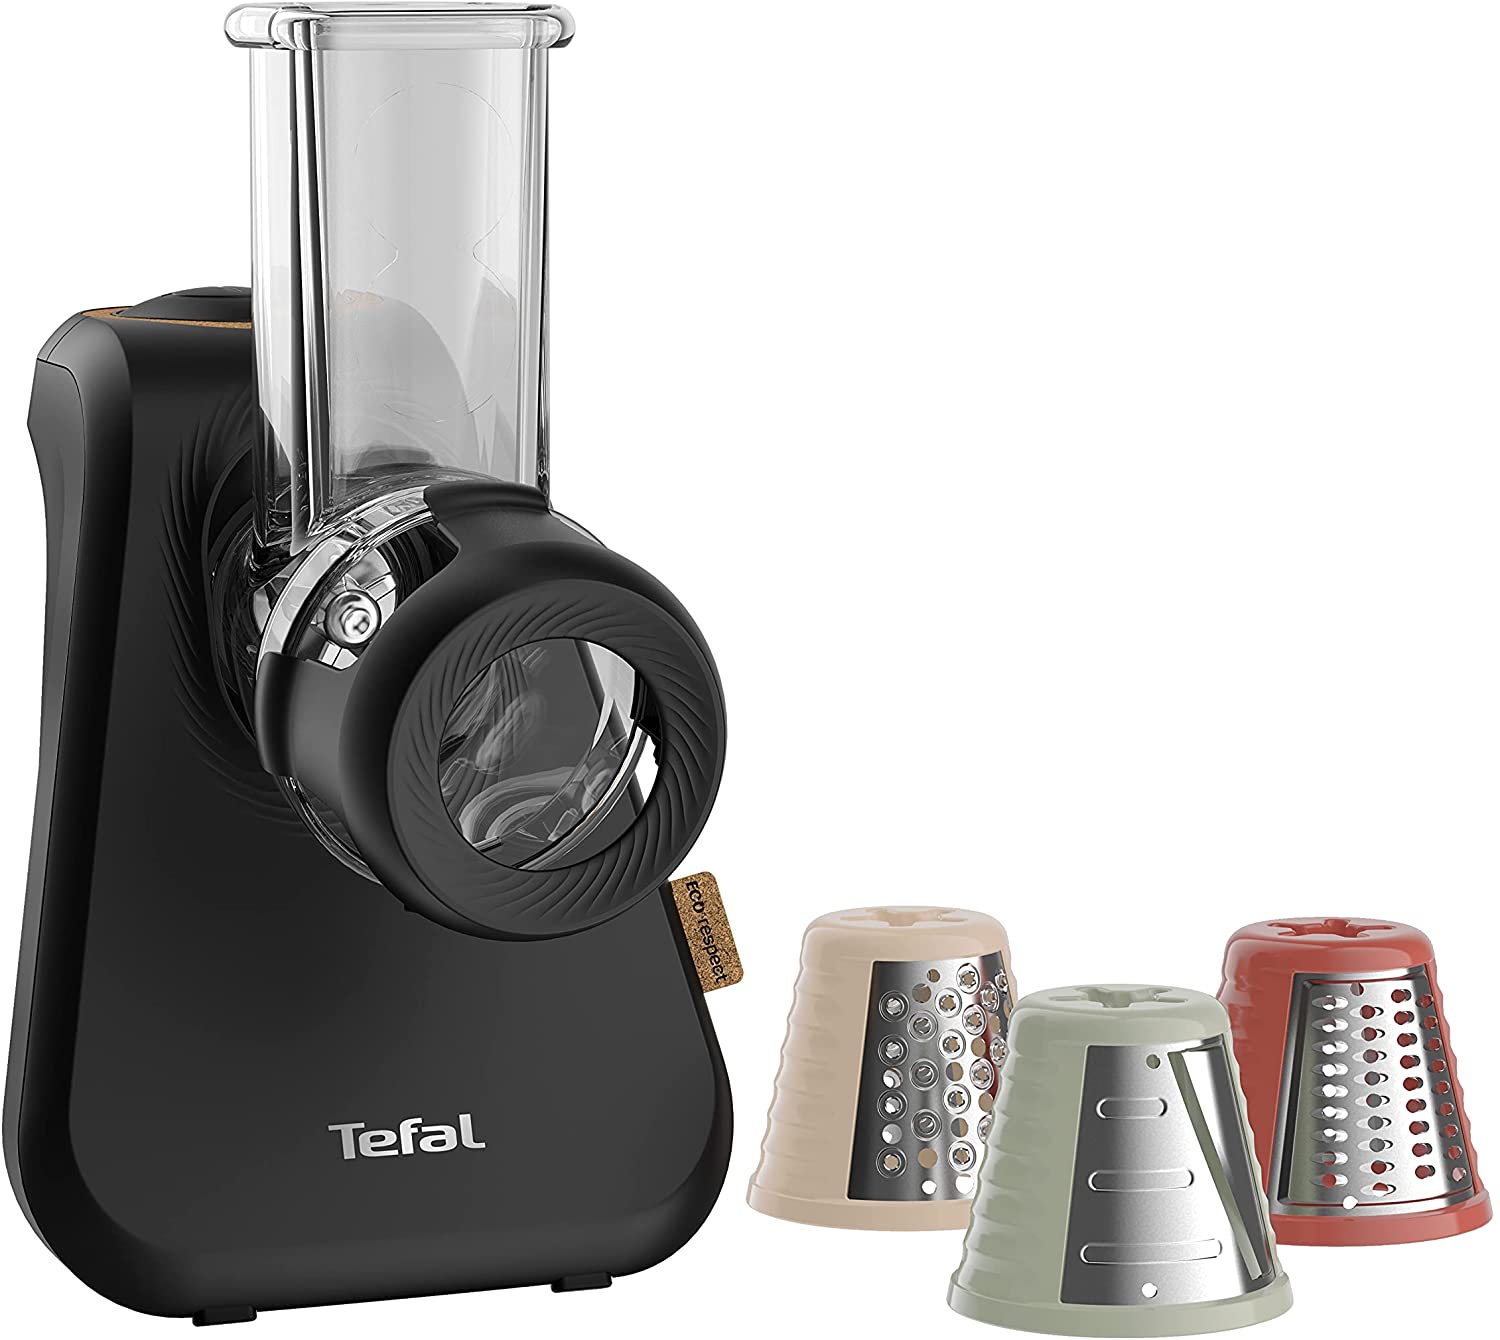 Tefal MB77EN Eco Respect Grater | 200W Motor | 3 Different Cone Attachments | Eco Design | 9% Recycled Plastic | Black